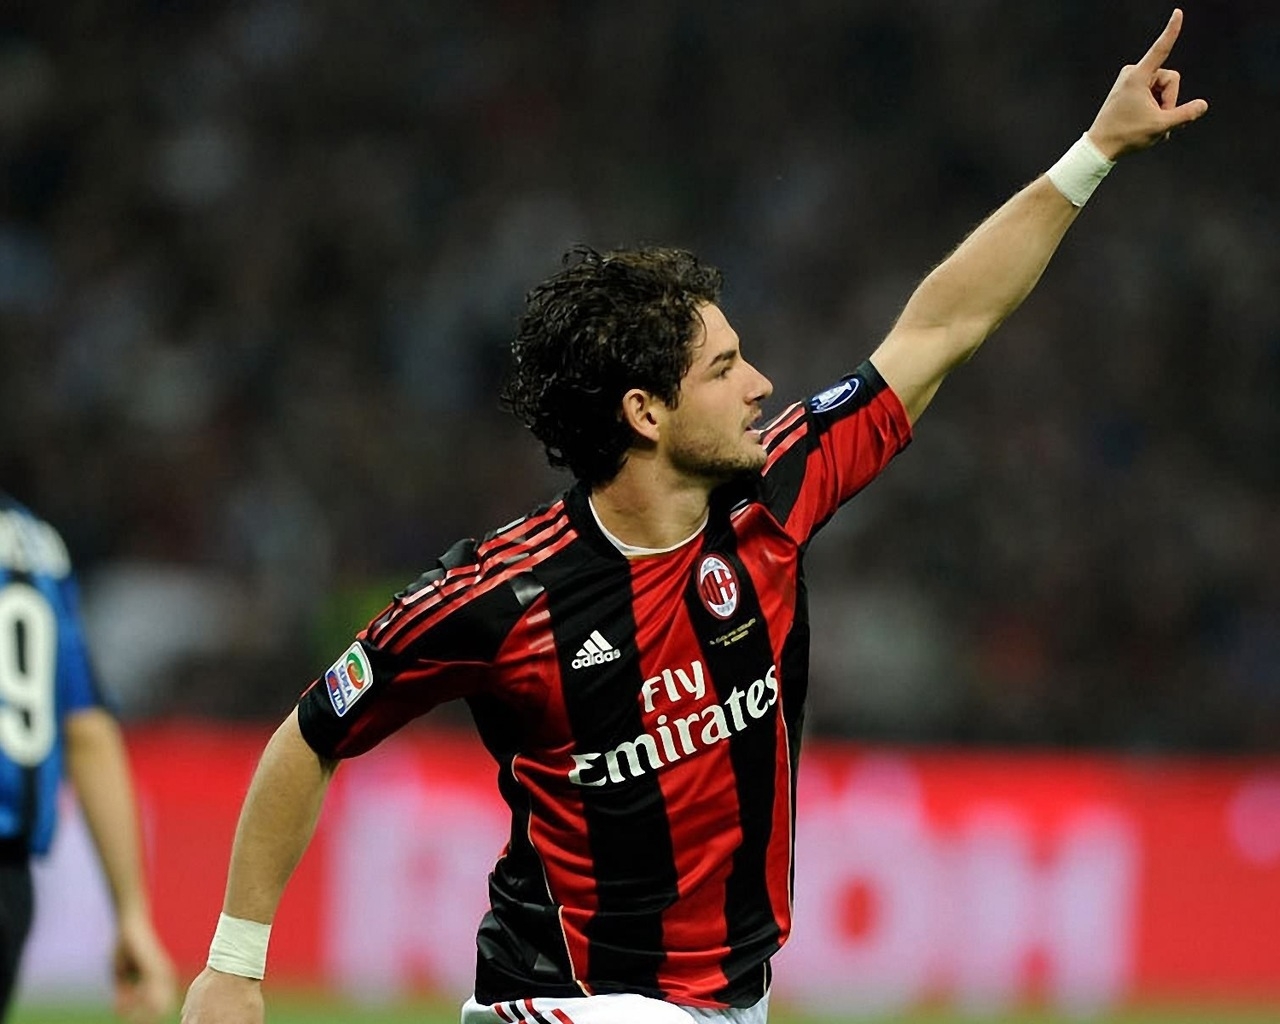 Alexandre Pato for 1280 x 1024 resolution